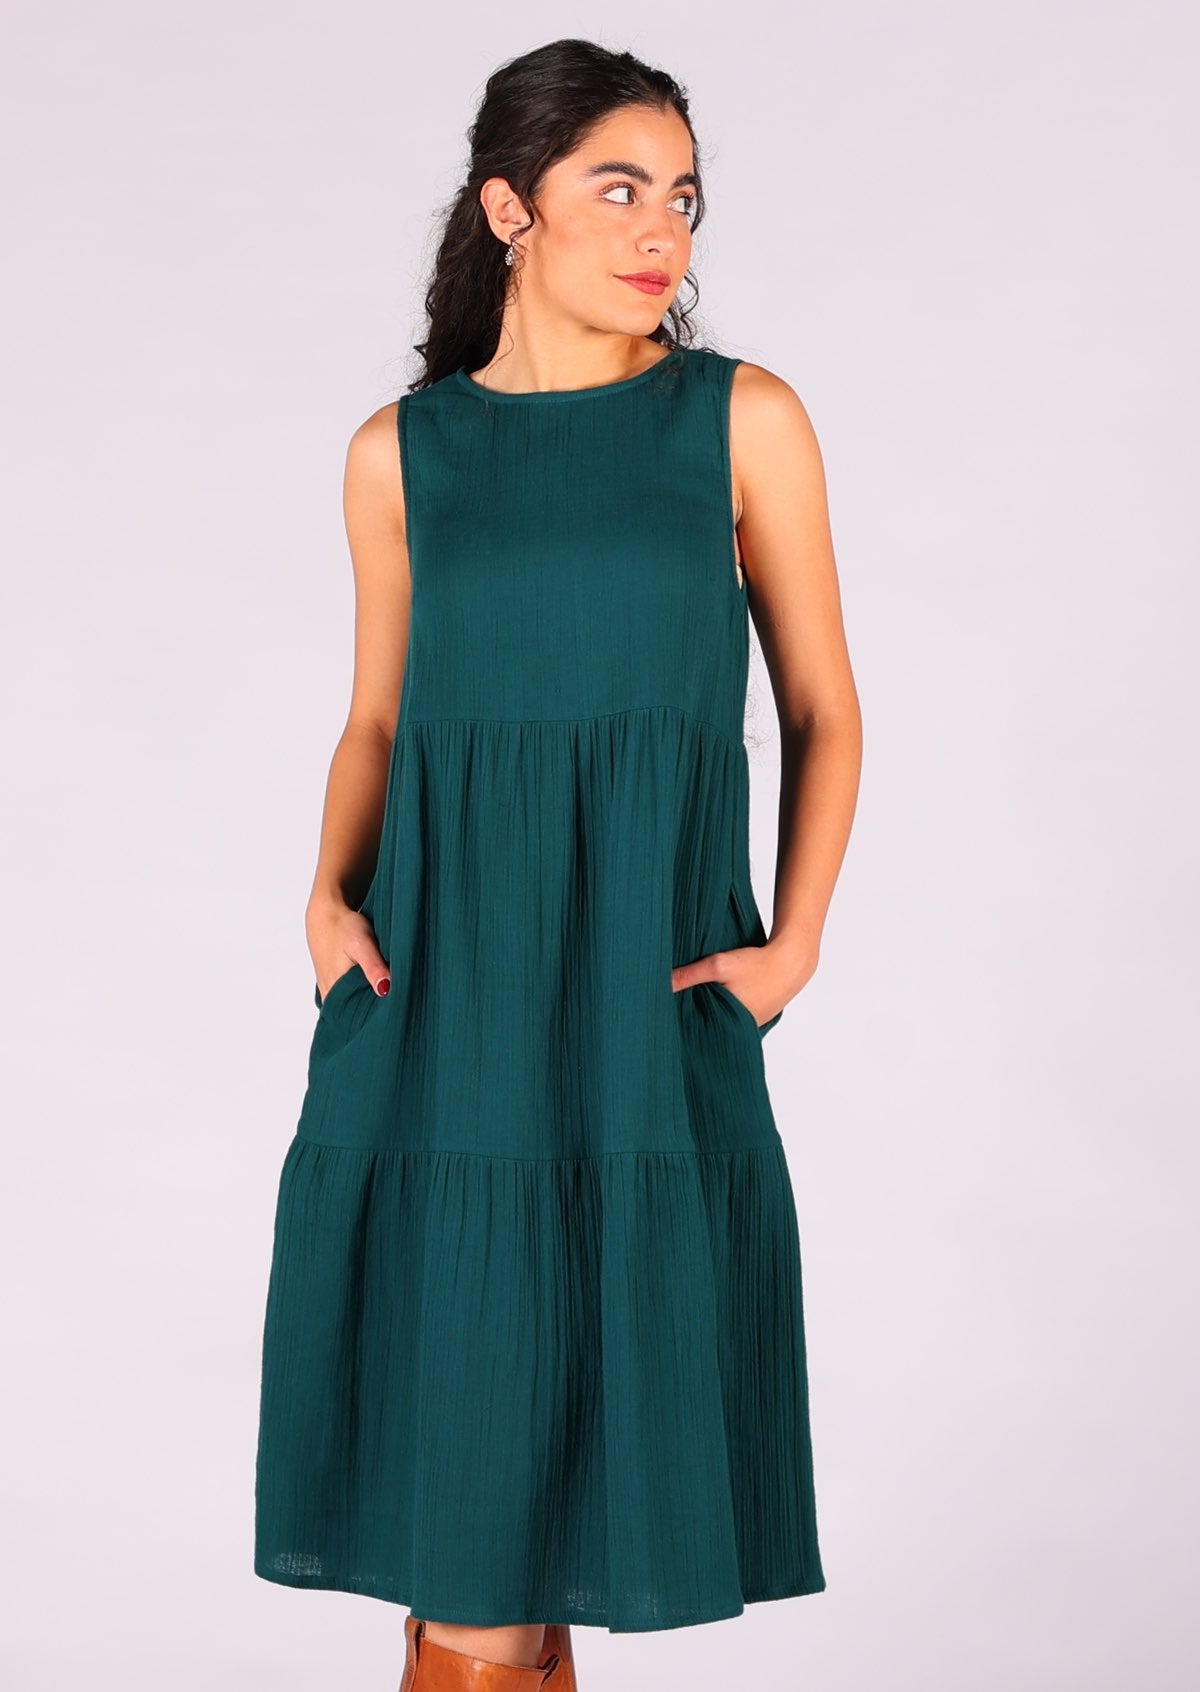 Double cotton sleeveless tiered dress that sits over the knee has hidden side pocekts